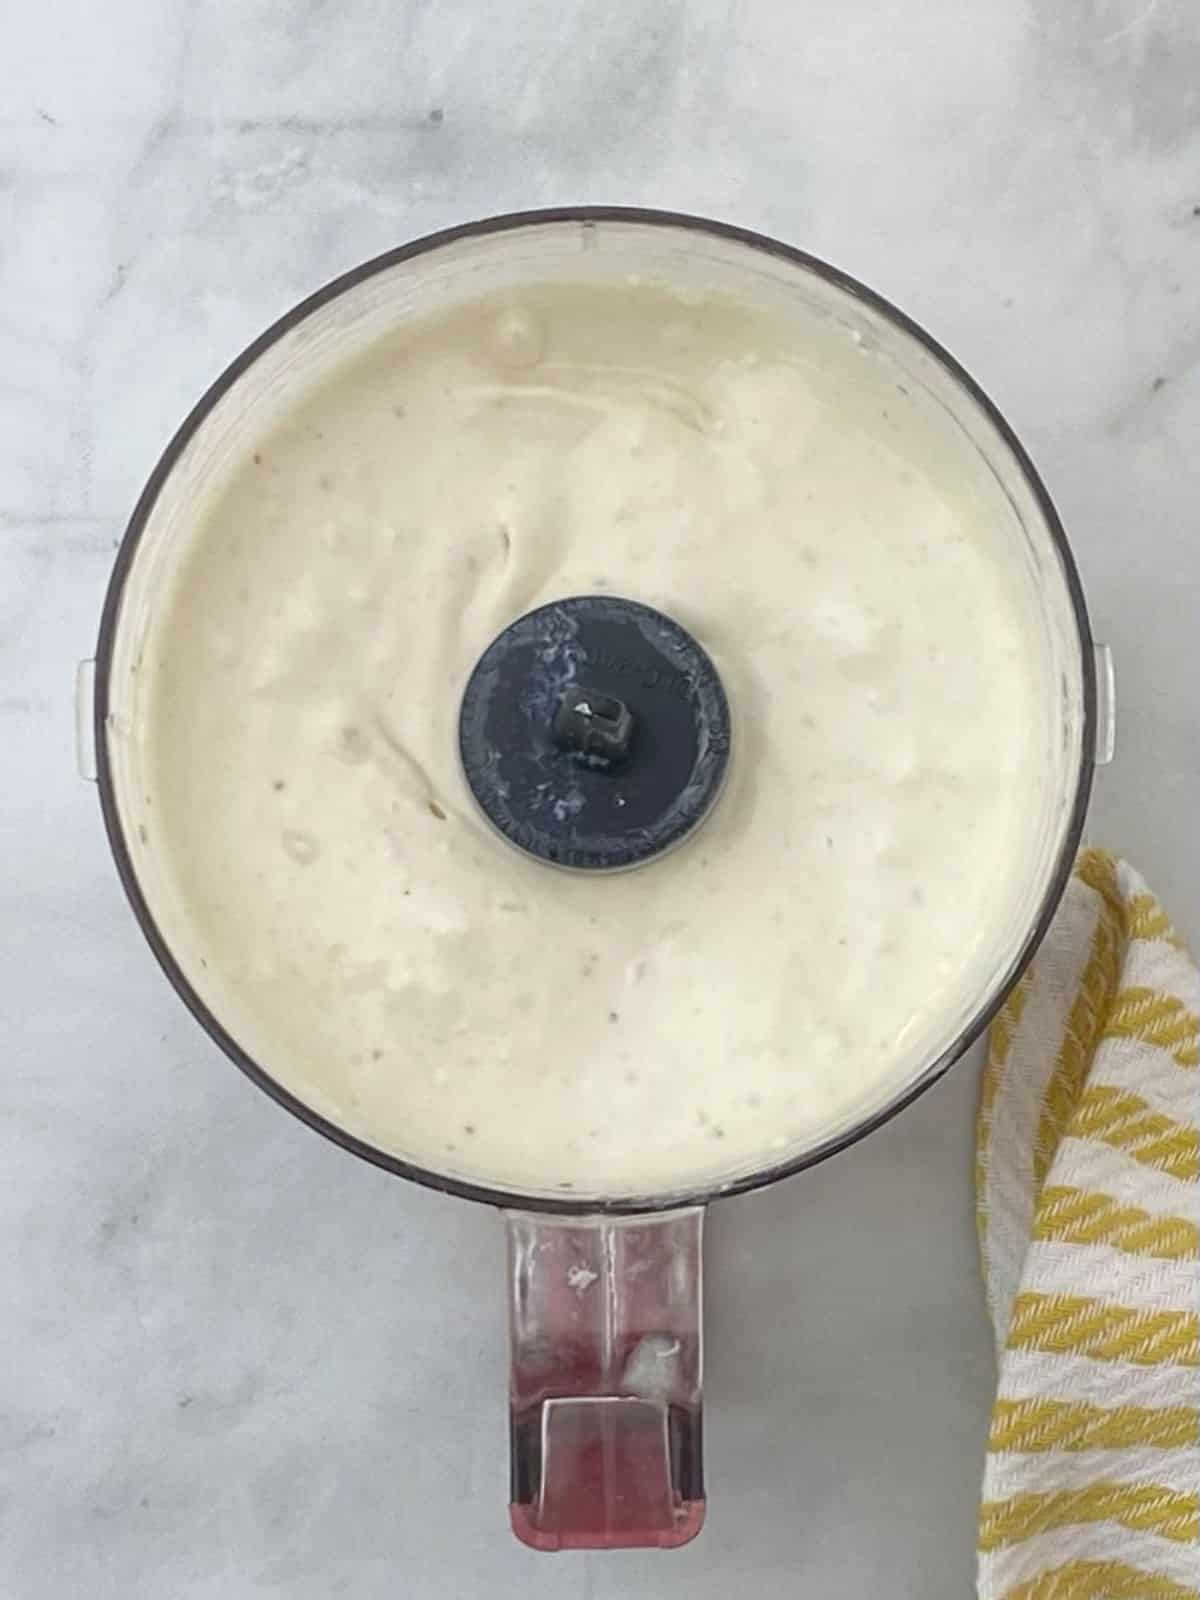 blending blue cheese sauce in food processor.